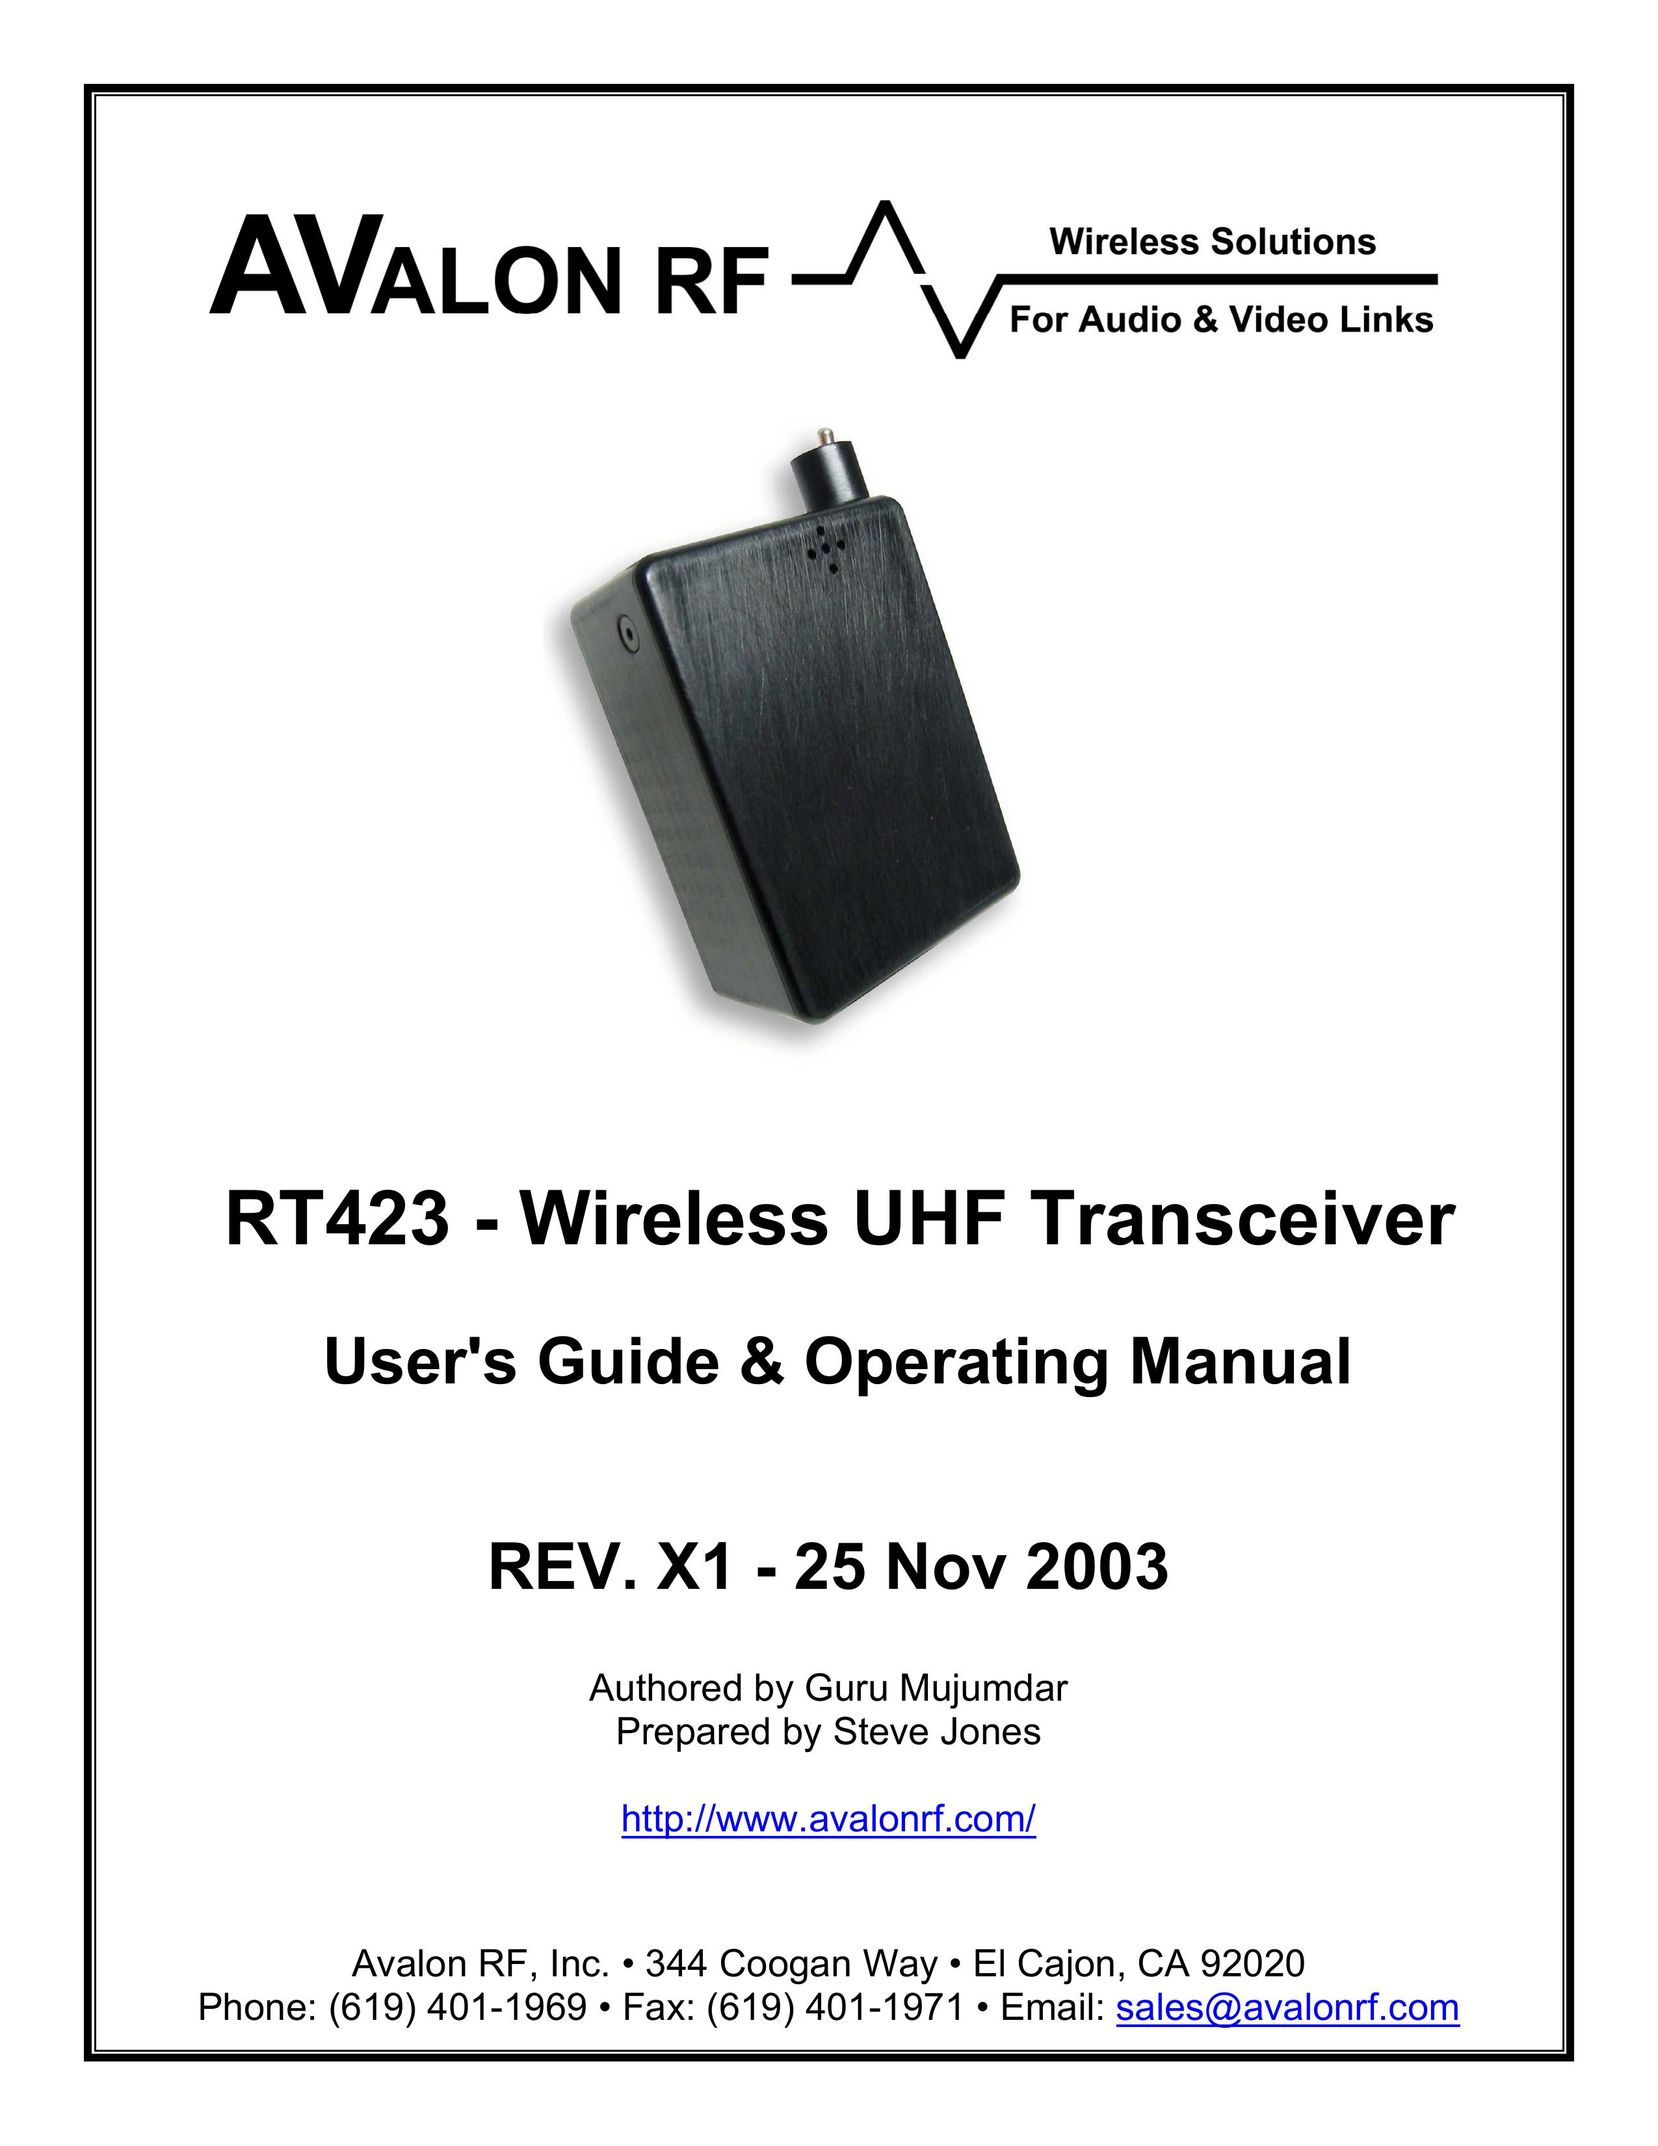 Avalon Acoustics RT423 Home Security System User Manual